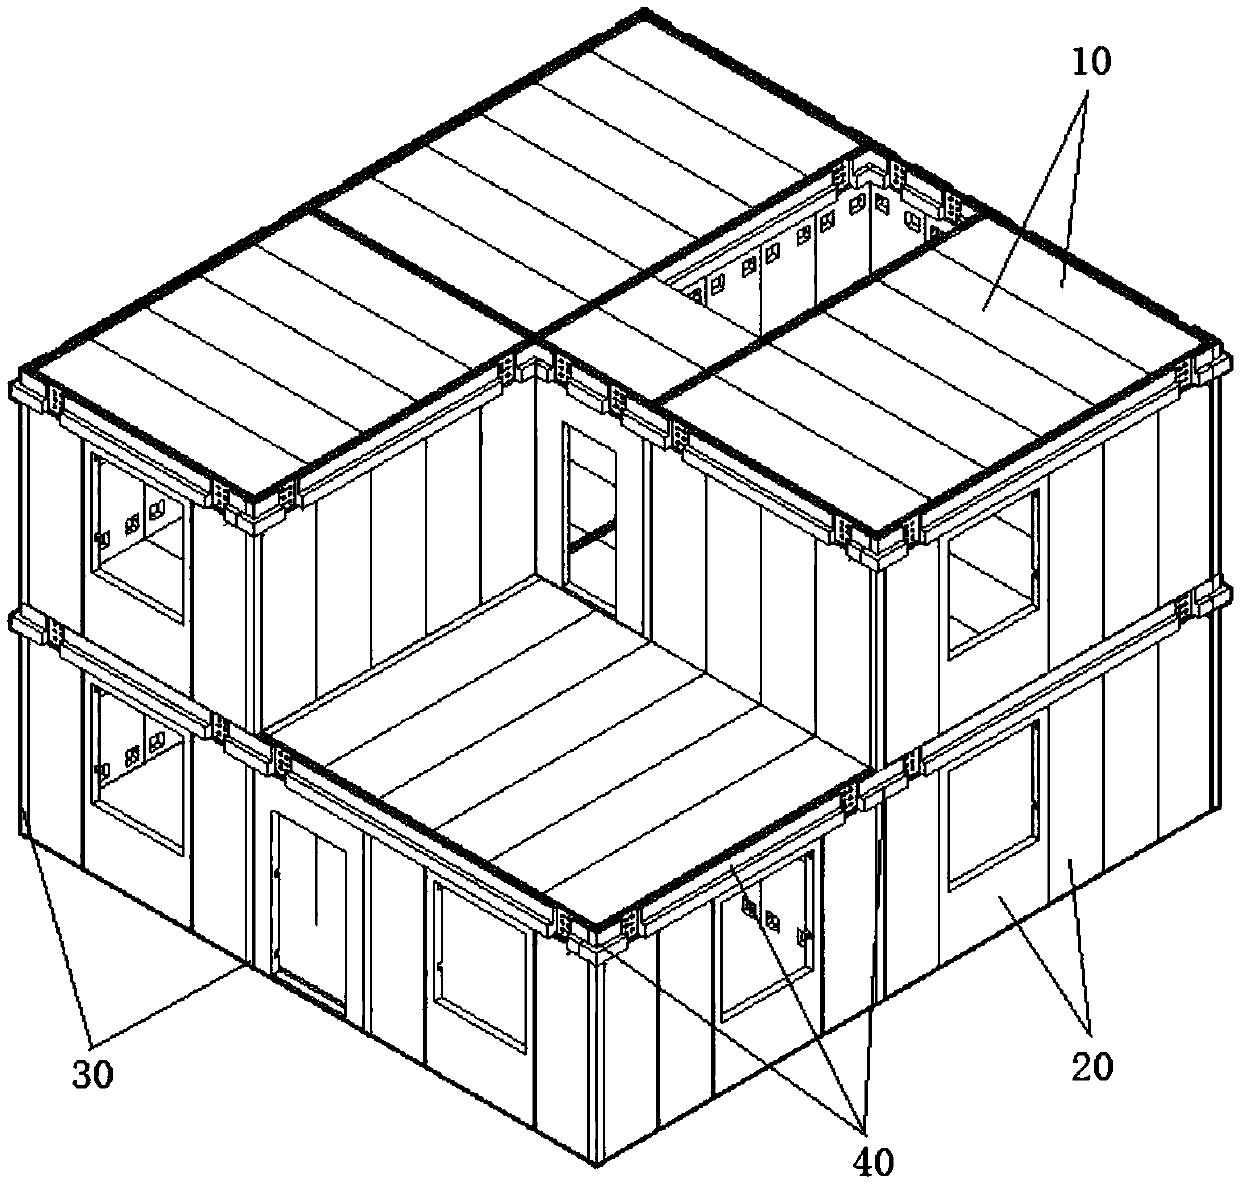 Full-fabricated-type house system